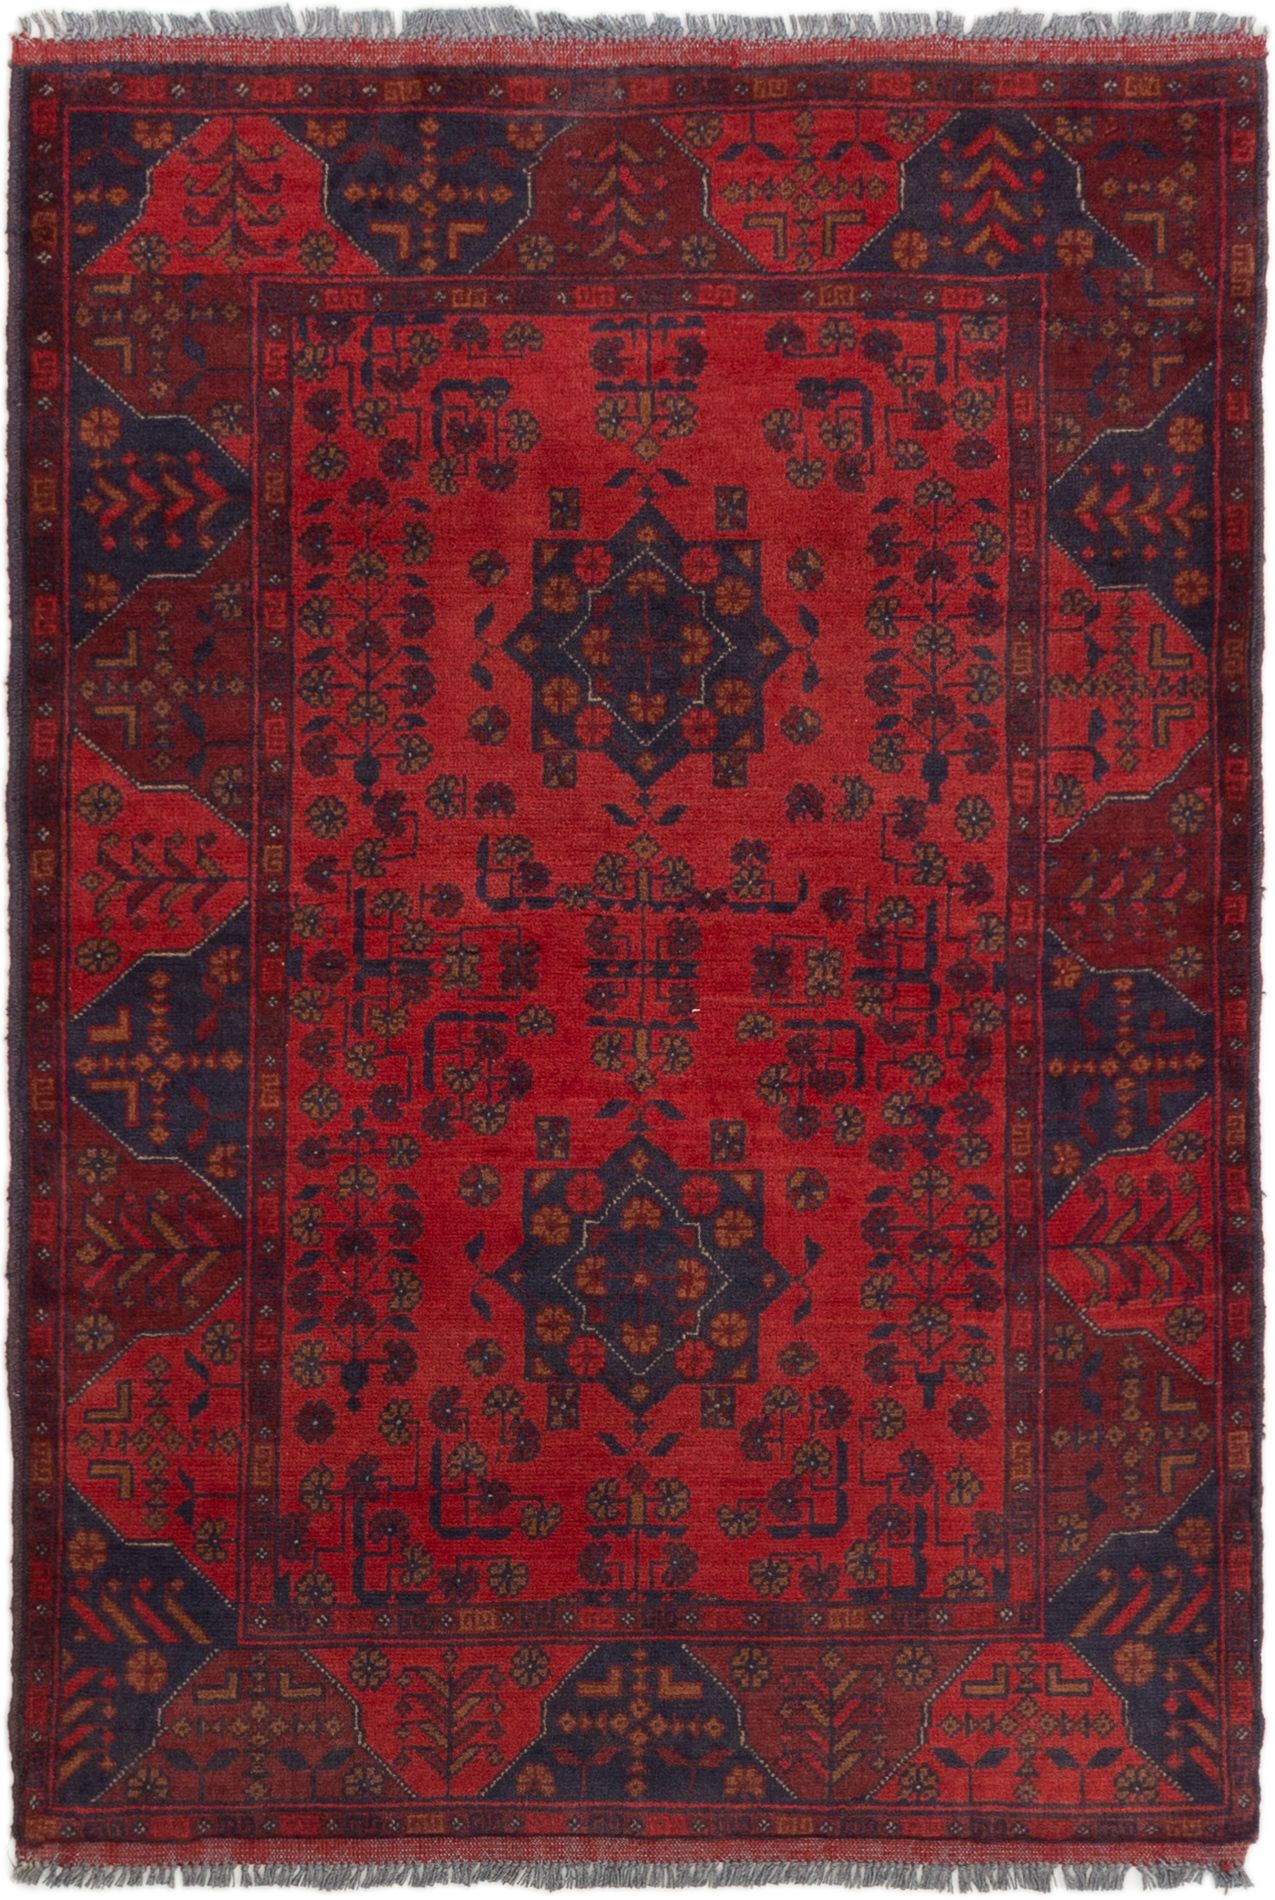 Hand-knotted Finest Khal Mohammadi Red Wool Rug 3'3" x 4'9"  Size: 3'3" x 4'9"  